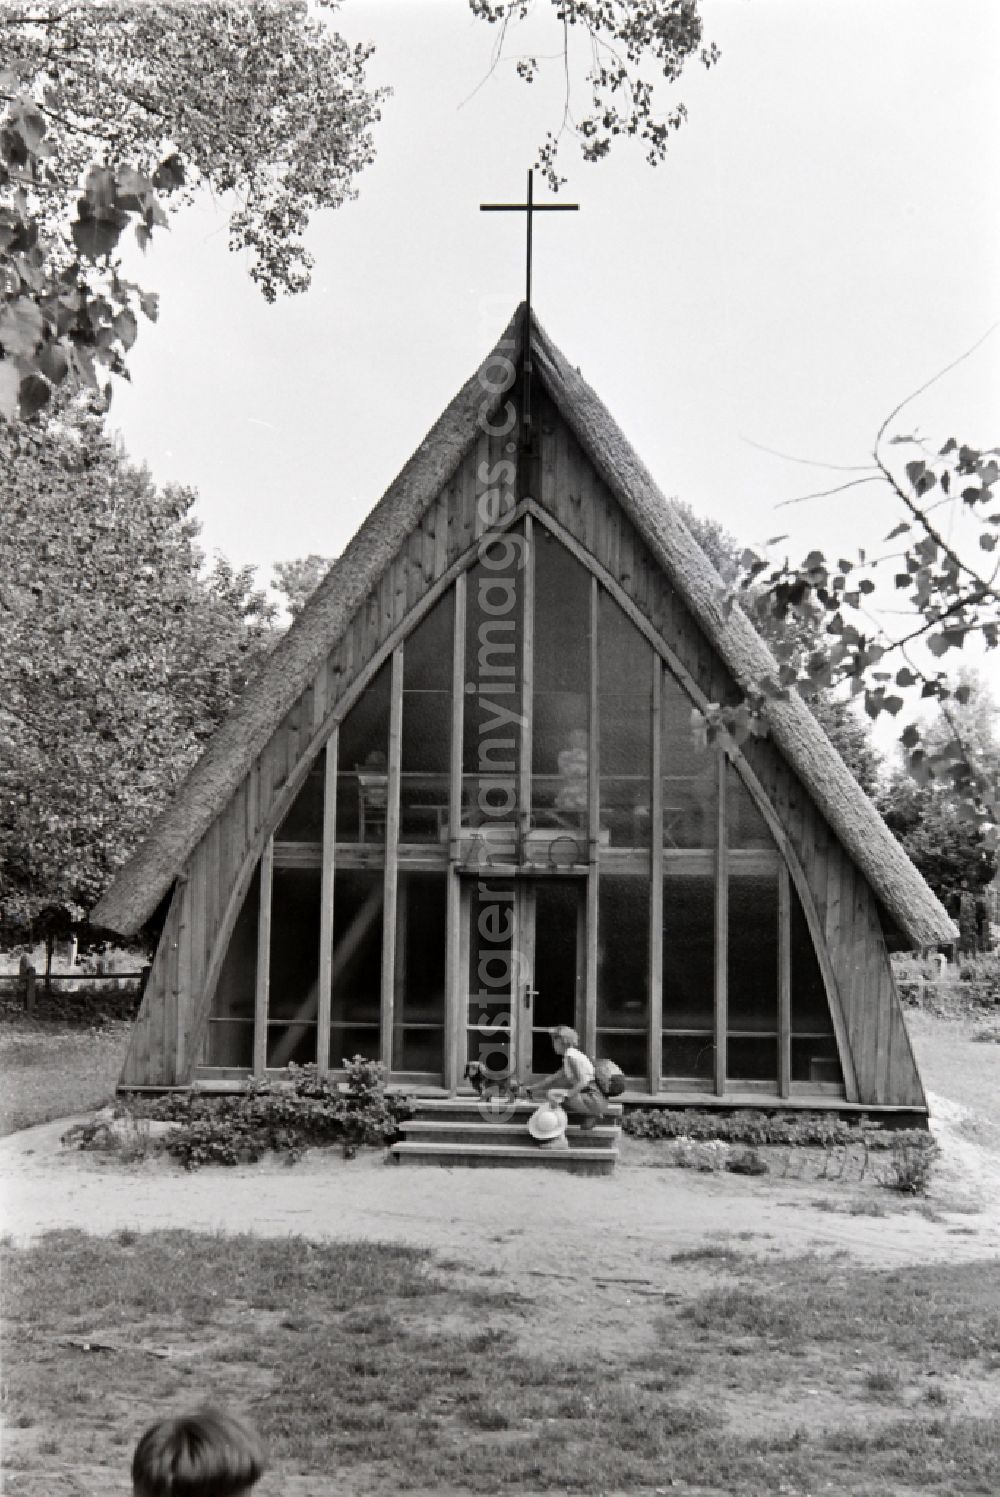 GDR photo archive: Ahrenshoop - Facade and roof of the sacral building of the church Schifferkirche in Ahrenshoop in the state Mecklenburg-Western Pomerania on the territory of the former GDR, German Democratic Republic